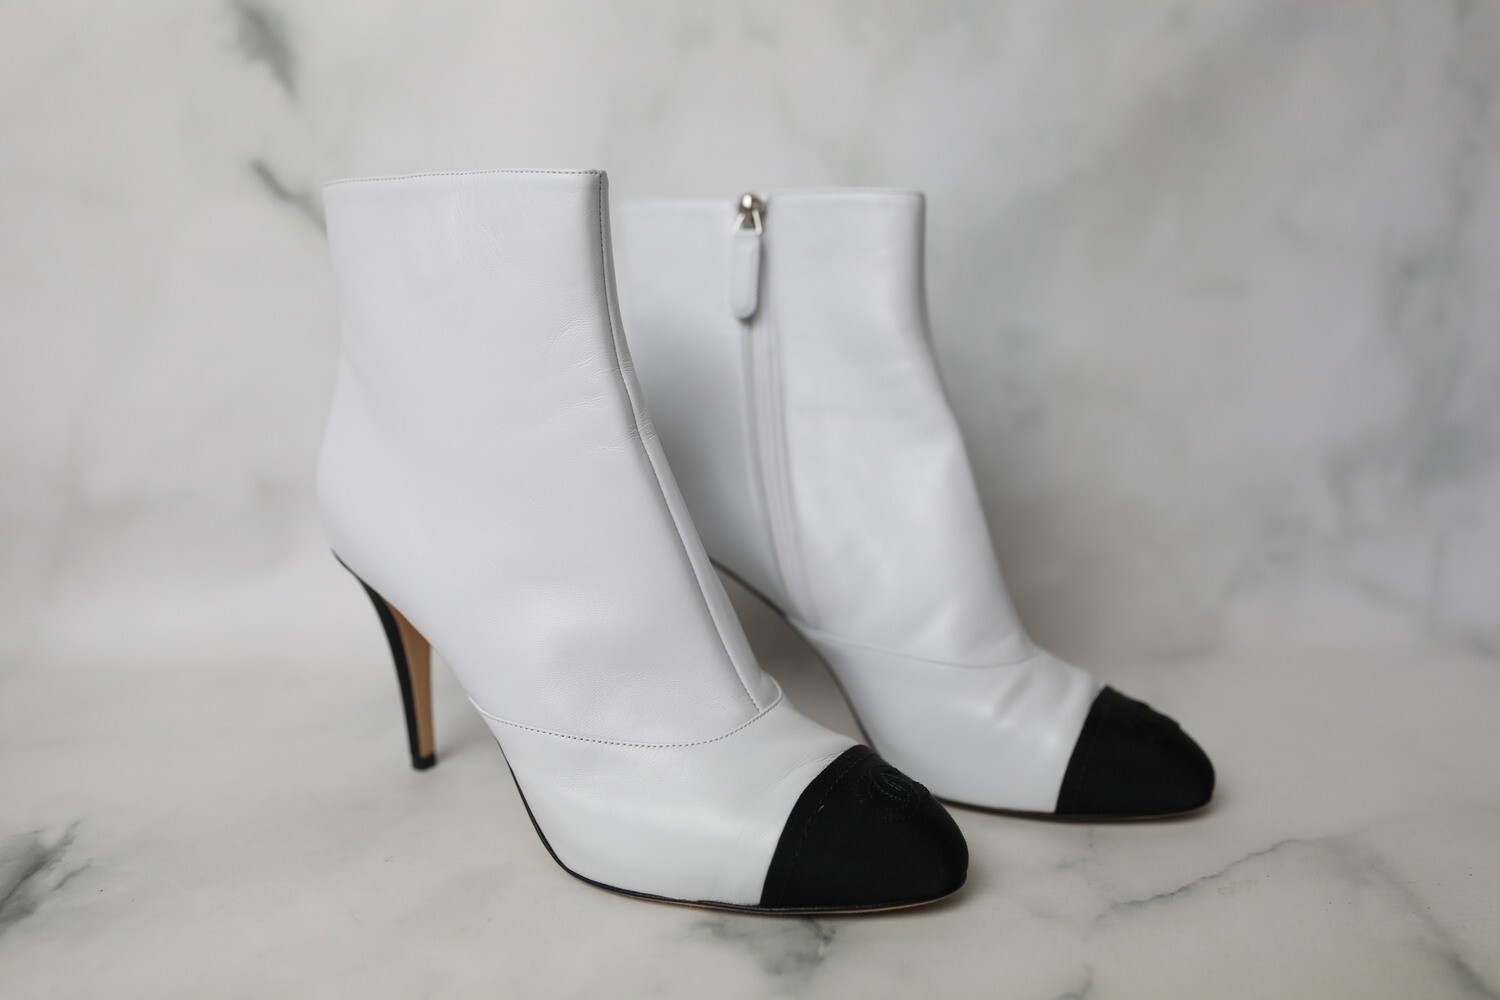 Chanel Shoes Boots, White with Black Cap Toe, Size 39.5, New in Box WA001